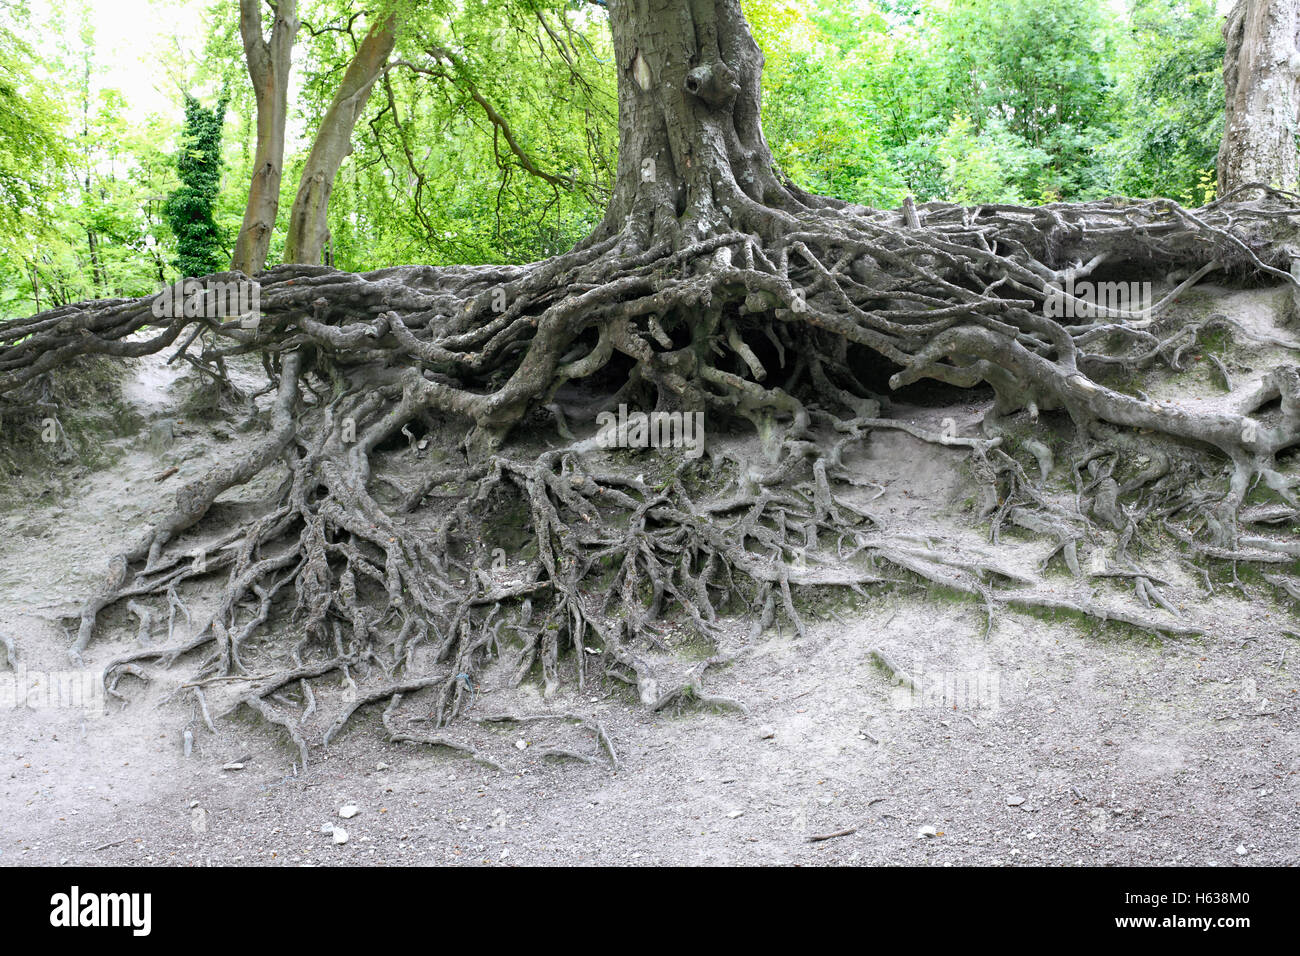 BIG ROOTS,tree,florida,ground,nature,landscape,outdoors,black and white